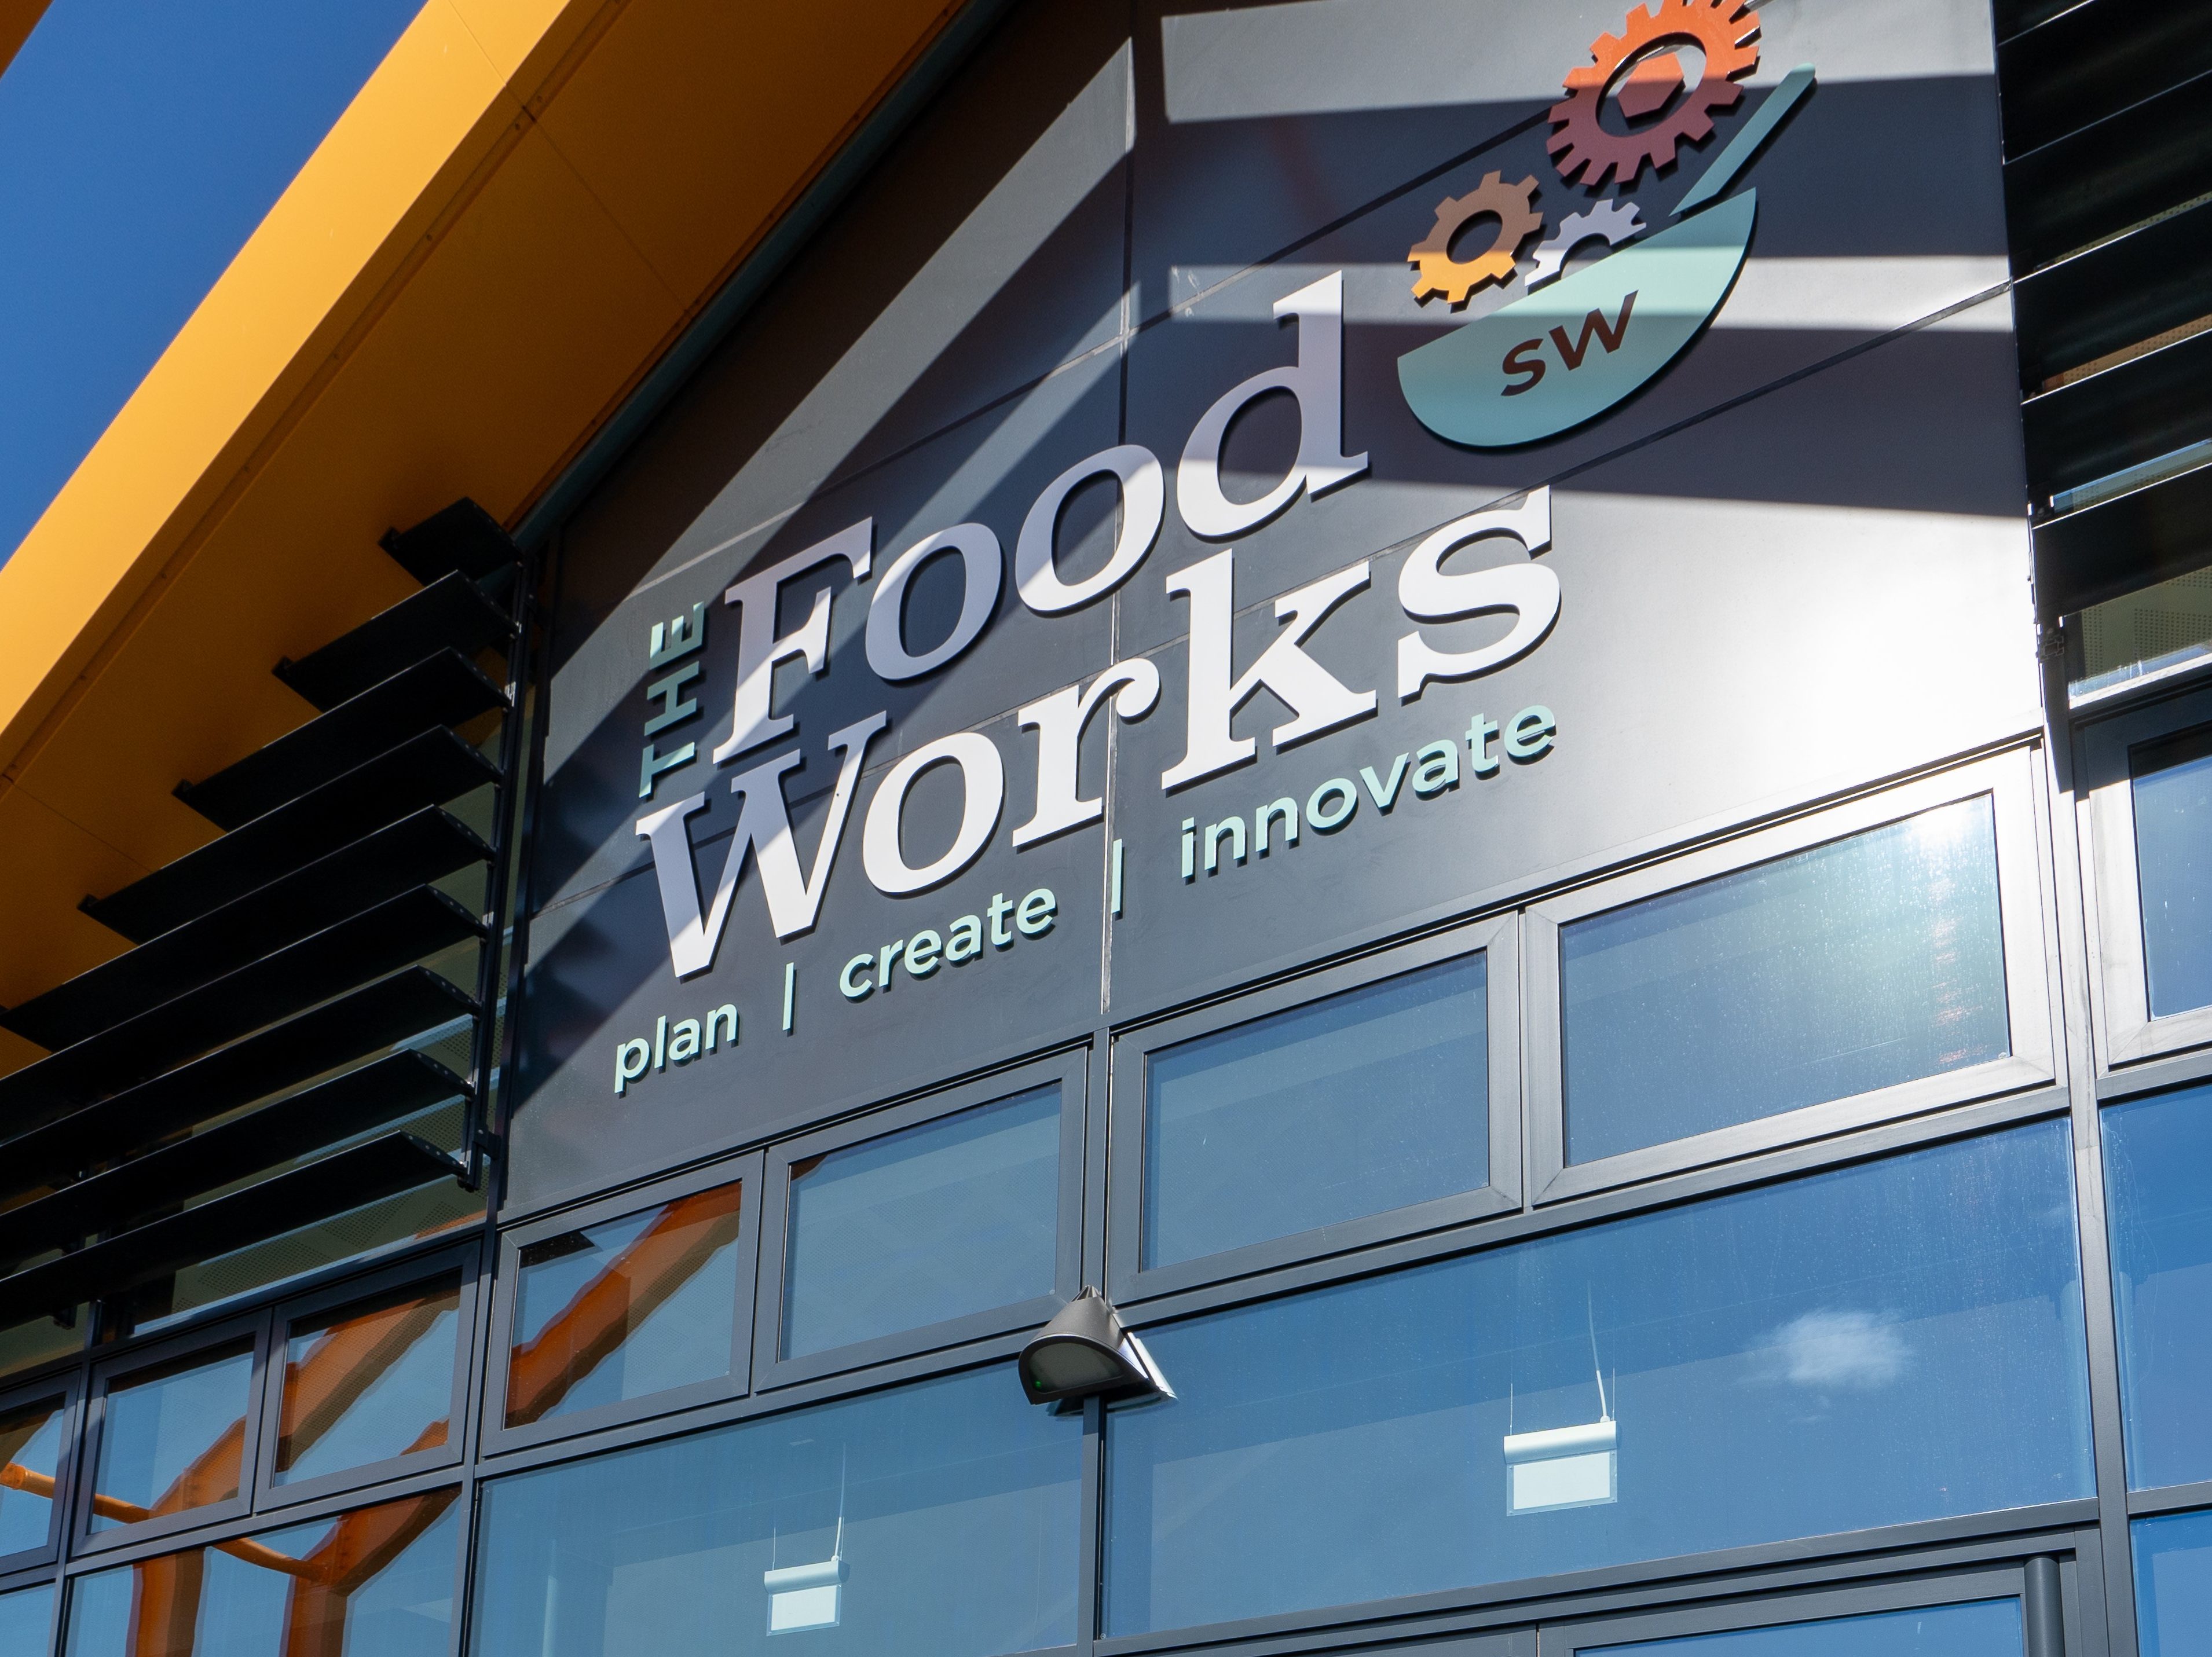 Food Works Phase 2 study explores demand for more food and drink business units in Weston